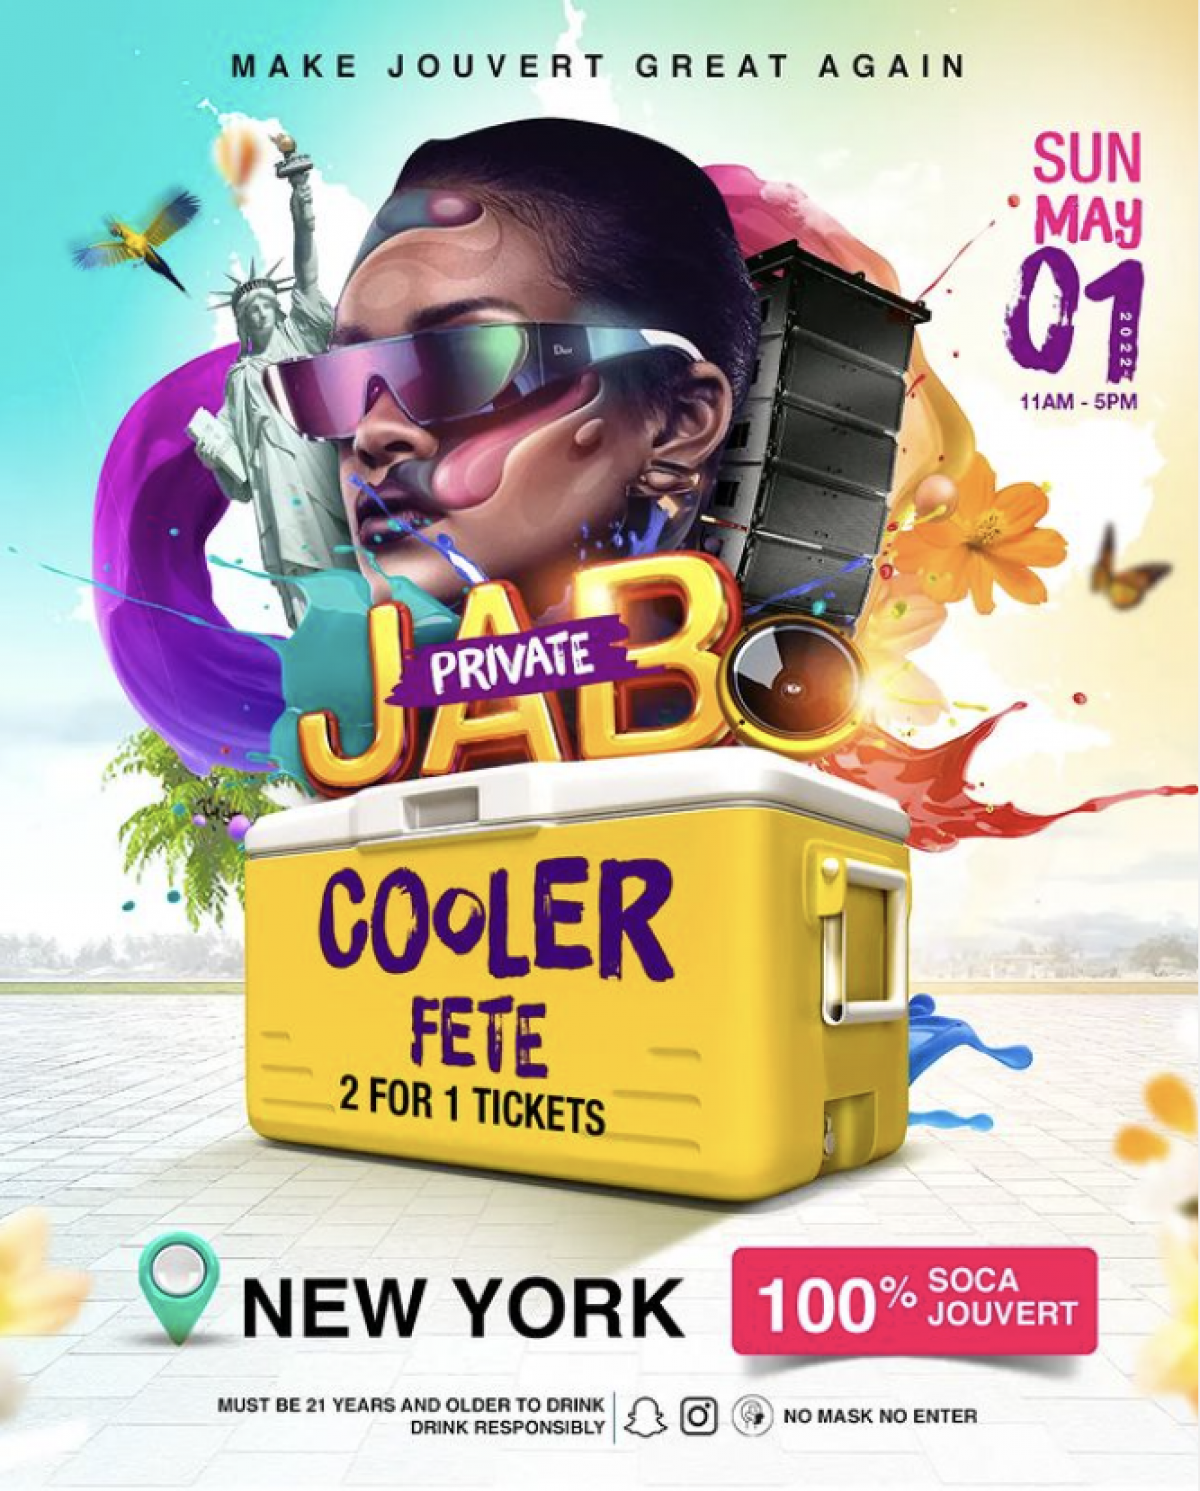 Private Jab - Cooler fete flyer or graphic.